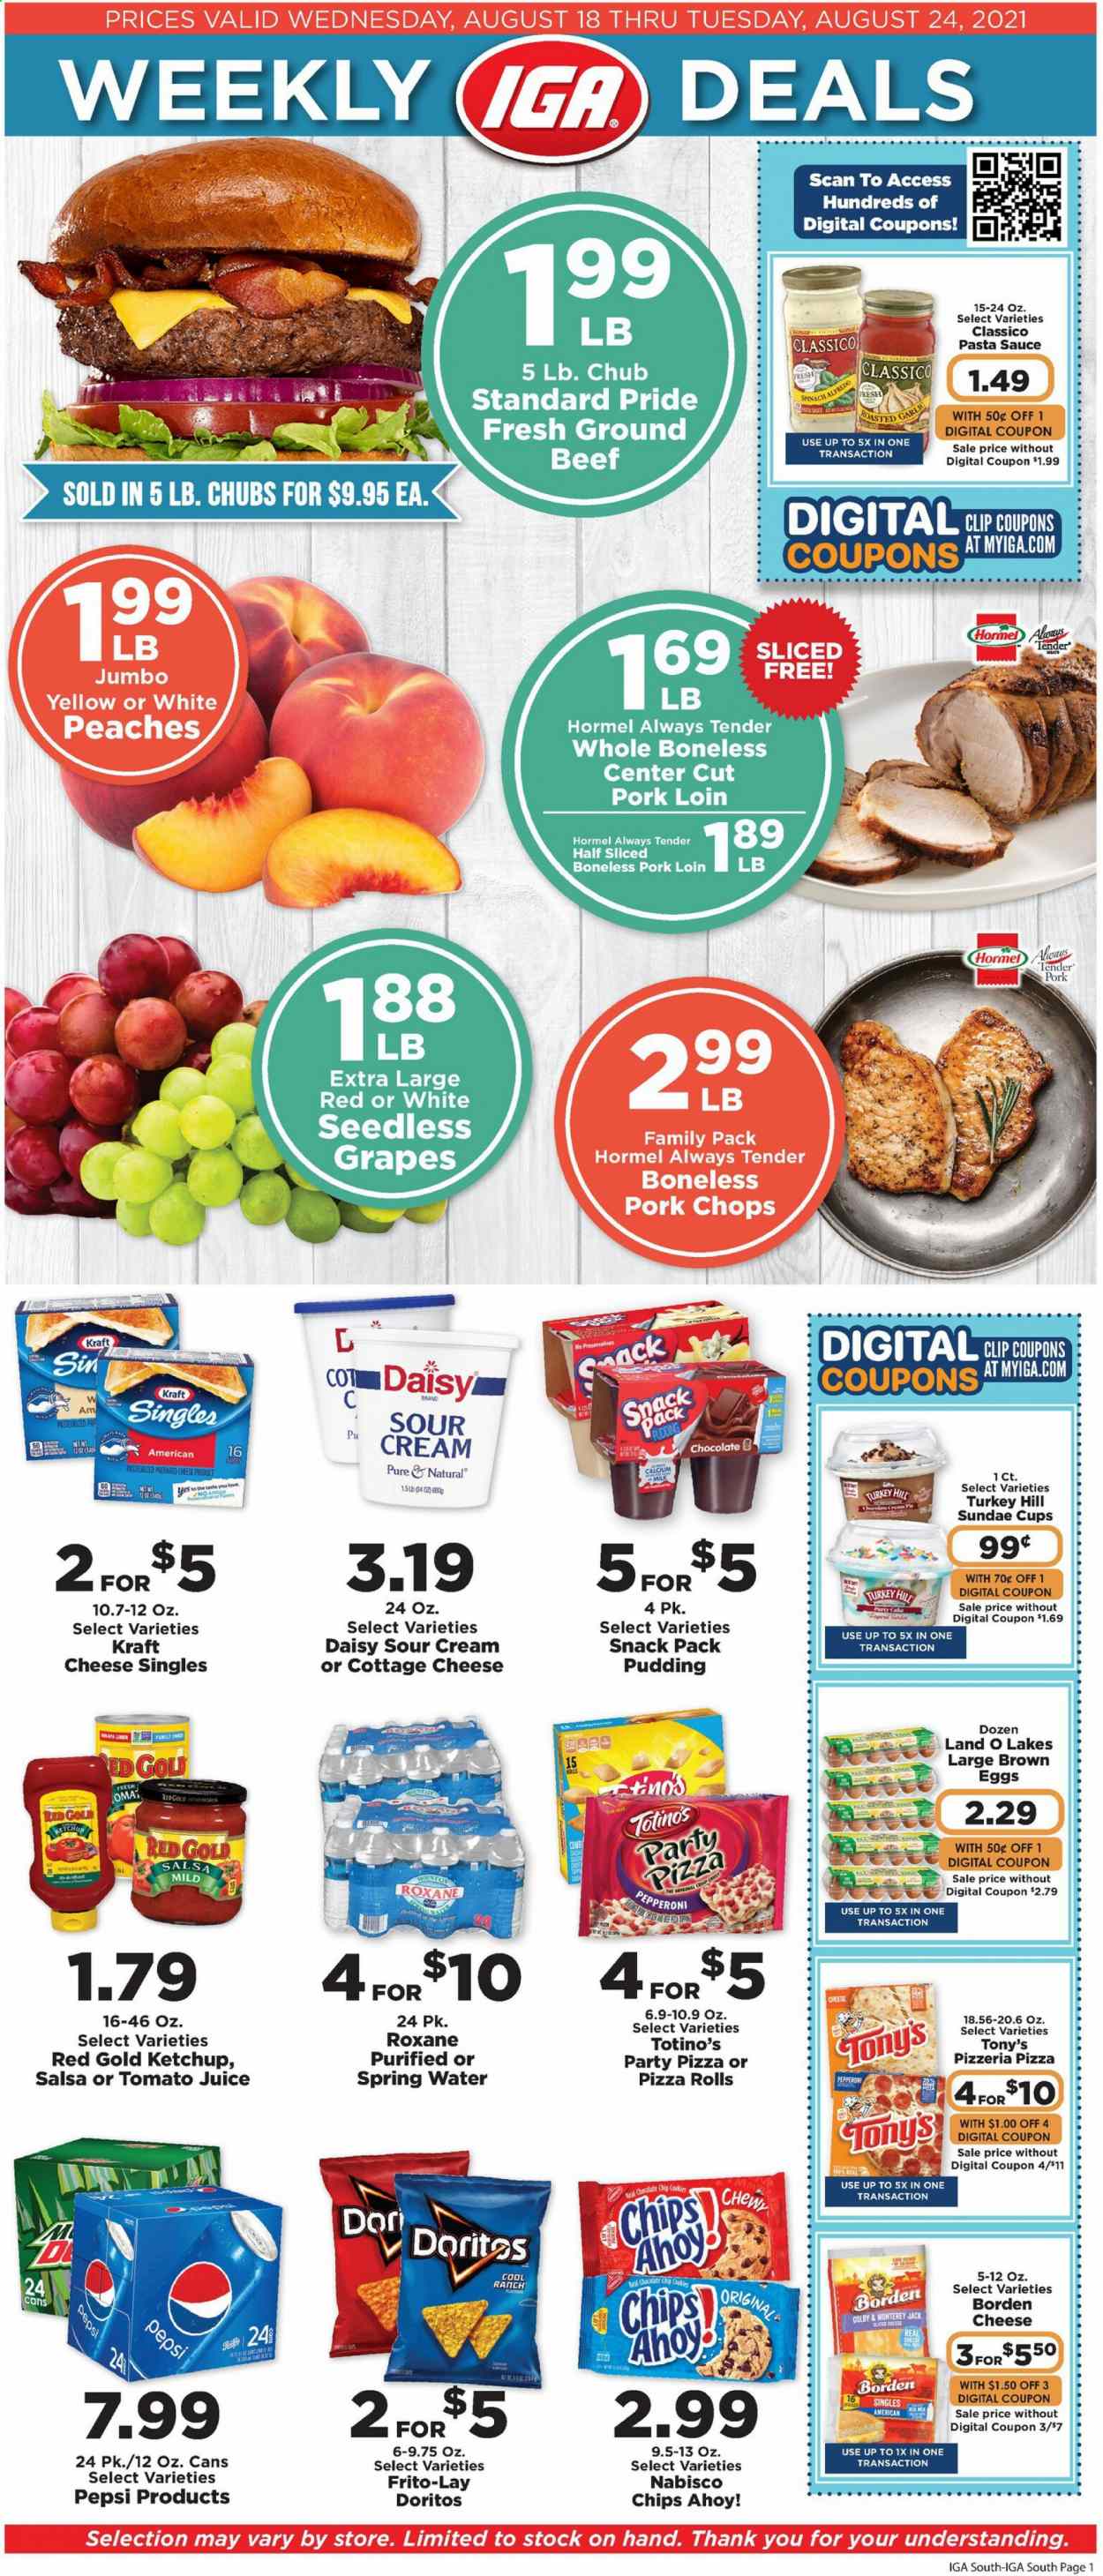 thumbnail - IGA Flyer - 08/18/2021 - 08/24/2021 - Sales products - cake, pie, pizza rolls, grapes, pizza, pasta sauce, sauce, Kraft®, Hormel, pepperoni, Colby cheese, cottage cheese, Monterey Jack cheese, pudding, milk, eggs, sour cream, Chips Ahoy!, Doritos, chips, Frito-Lay, ketchup, salsa, Classico, tomato juice, Pepsi, juice, spring water, beef meat, ground beef, pork chops, pork loin, pork meat, comb, calcium, peaches. Page 1.